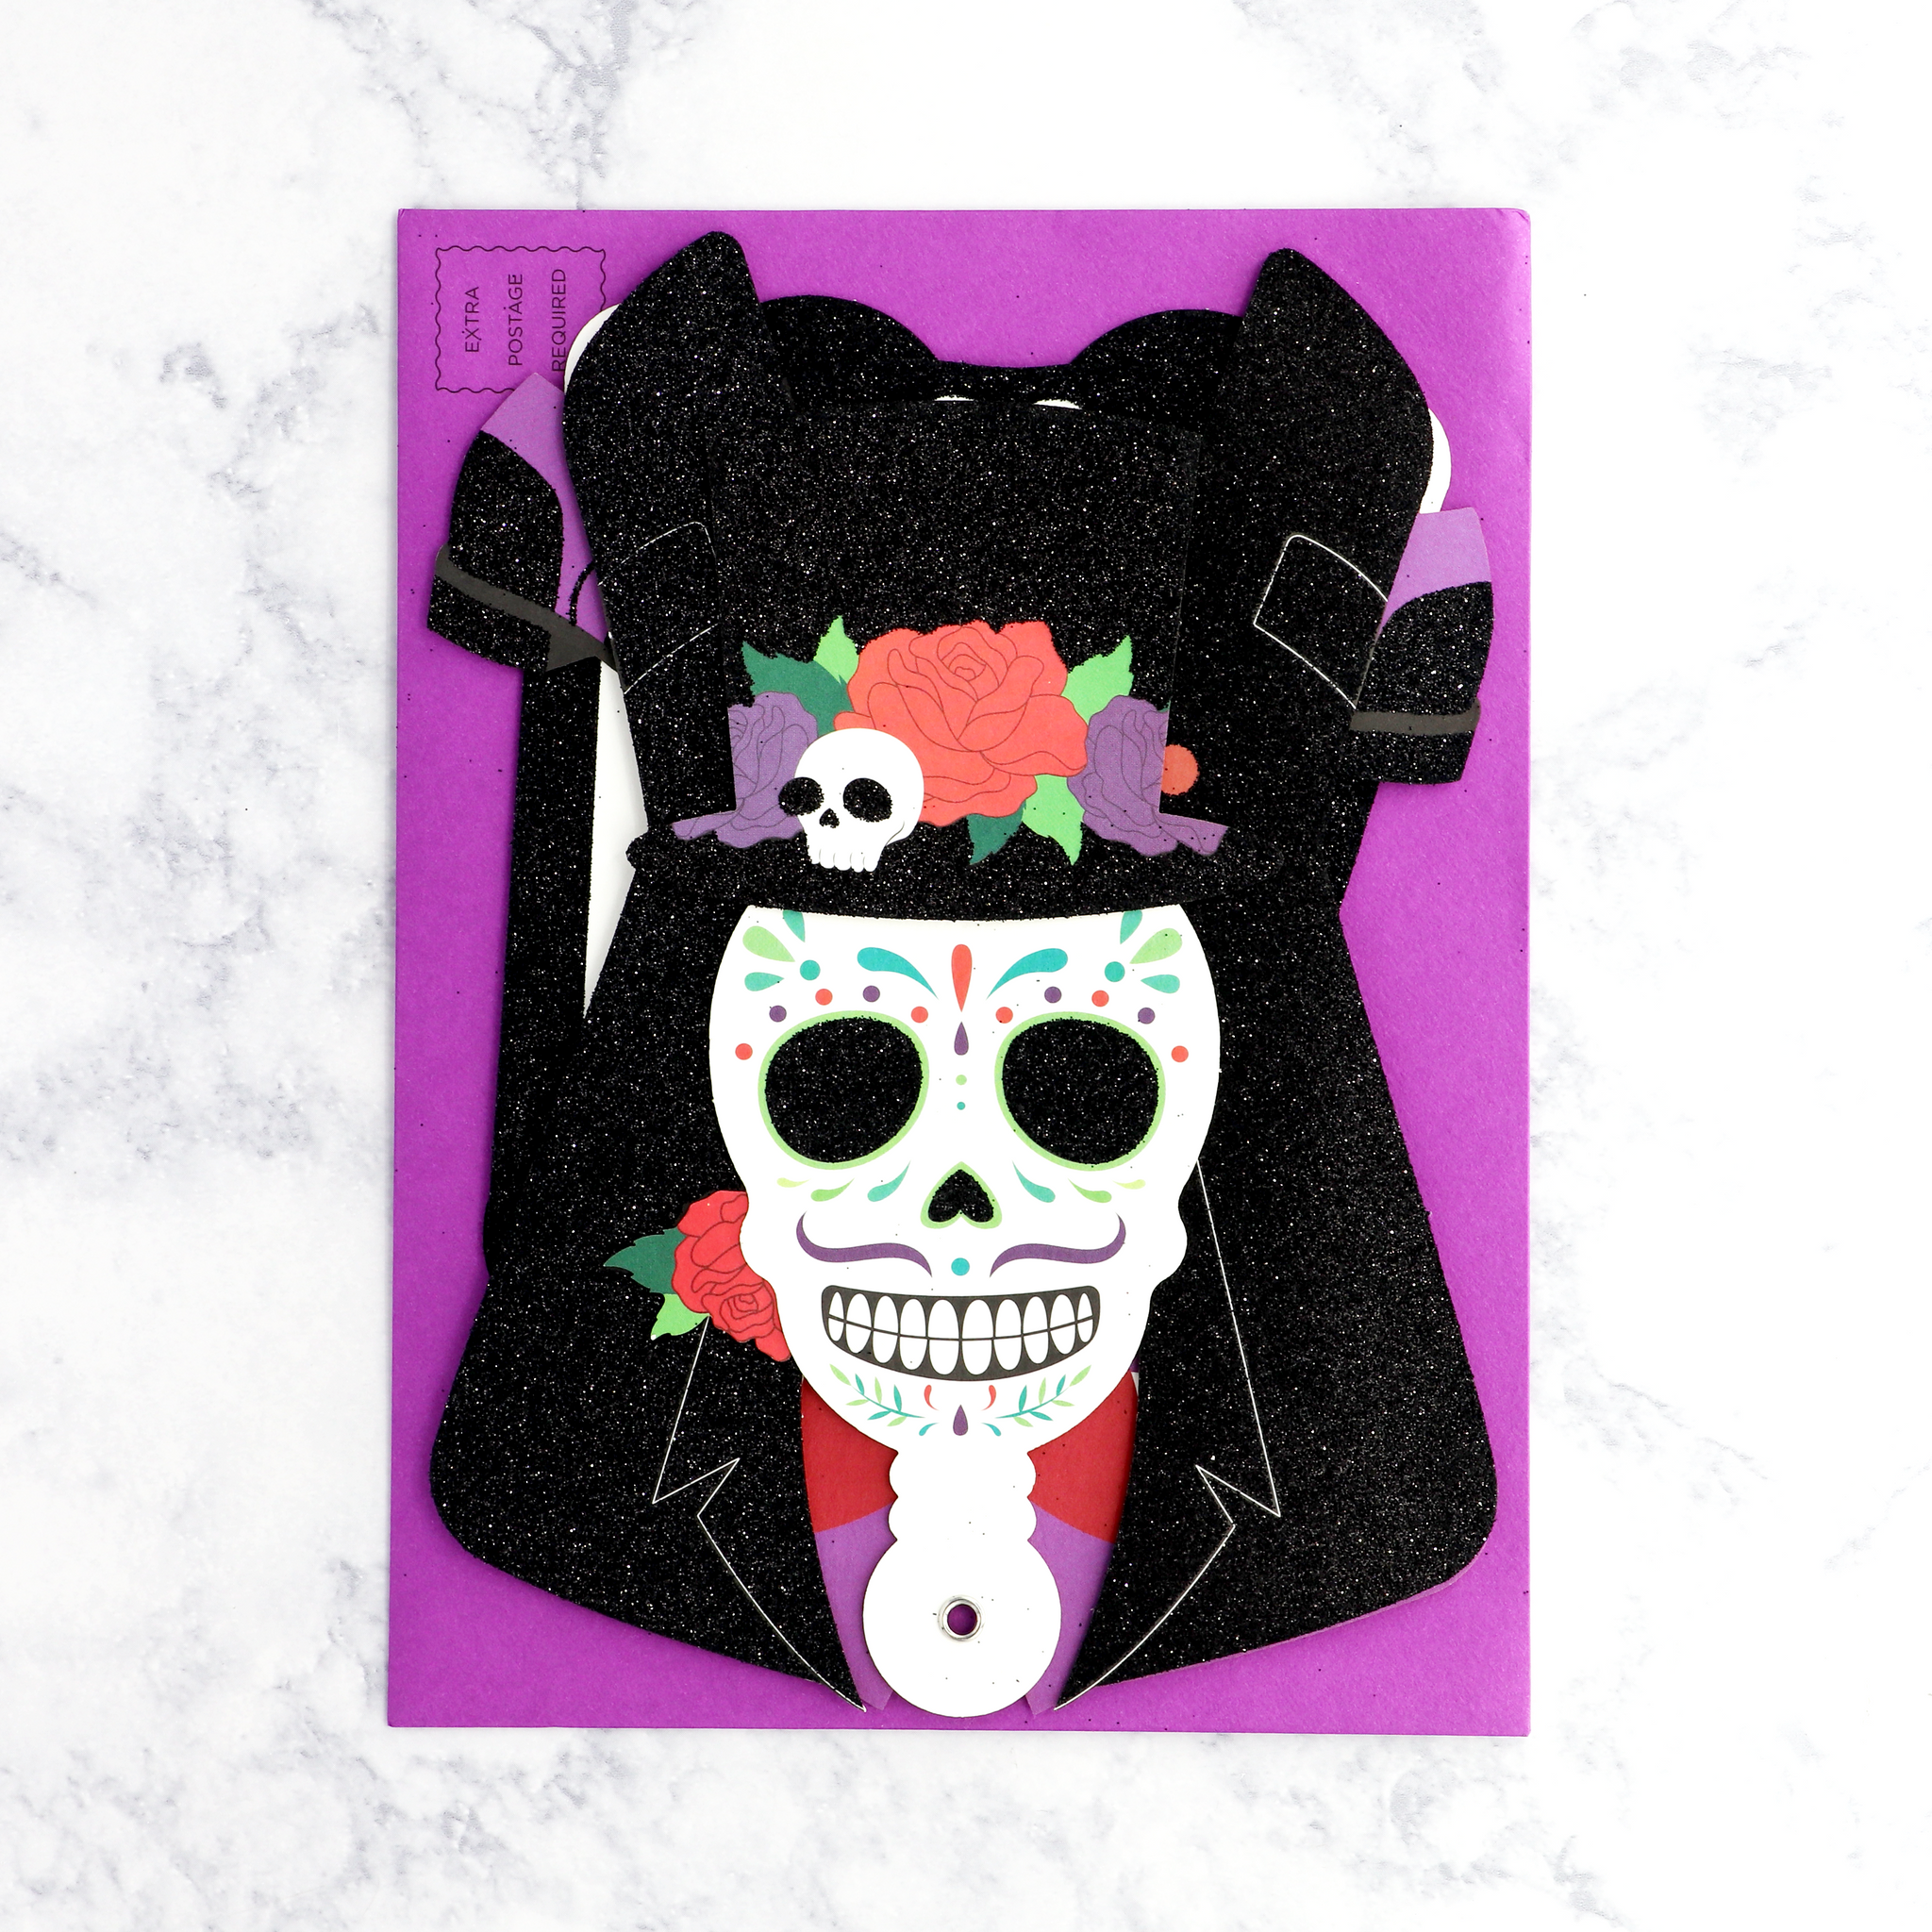 Articulated "Day of the Dead" Skeleton Halloween Card